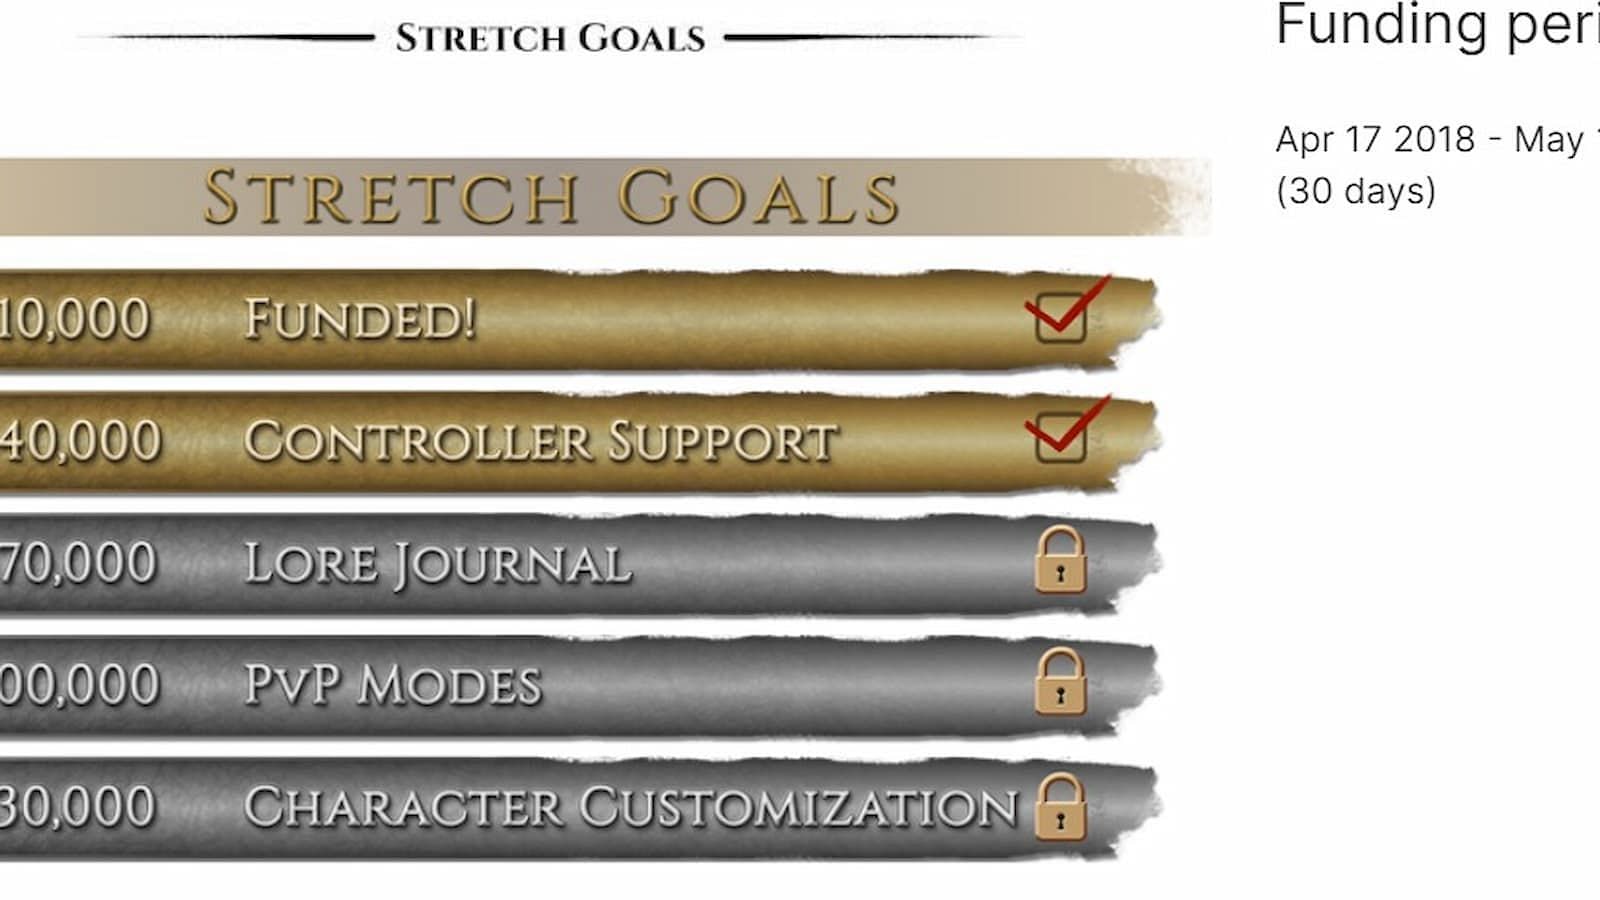 Character Customization was one of the stretch goals in the Kickstarter campaign (Image via Kickstarter)